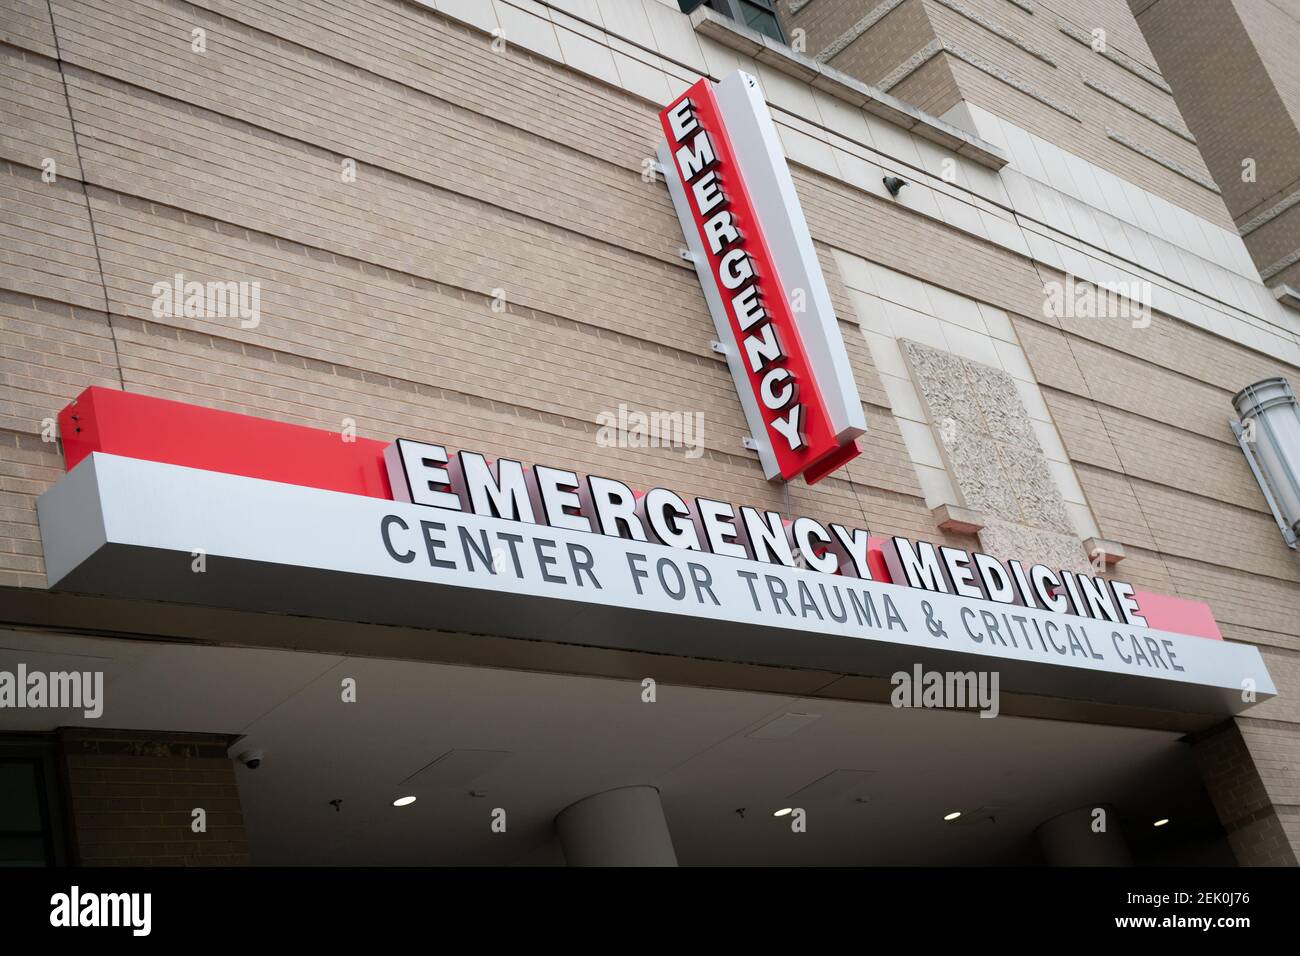 A general view of the Emergency Medicine sign at George Washington  University Hospital, which is operated jointly with Universal Health  Services (UHS), in Washington, D.C. on April 23, 2020 amid the Coronavirus